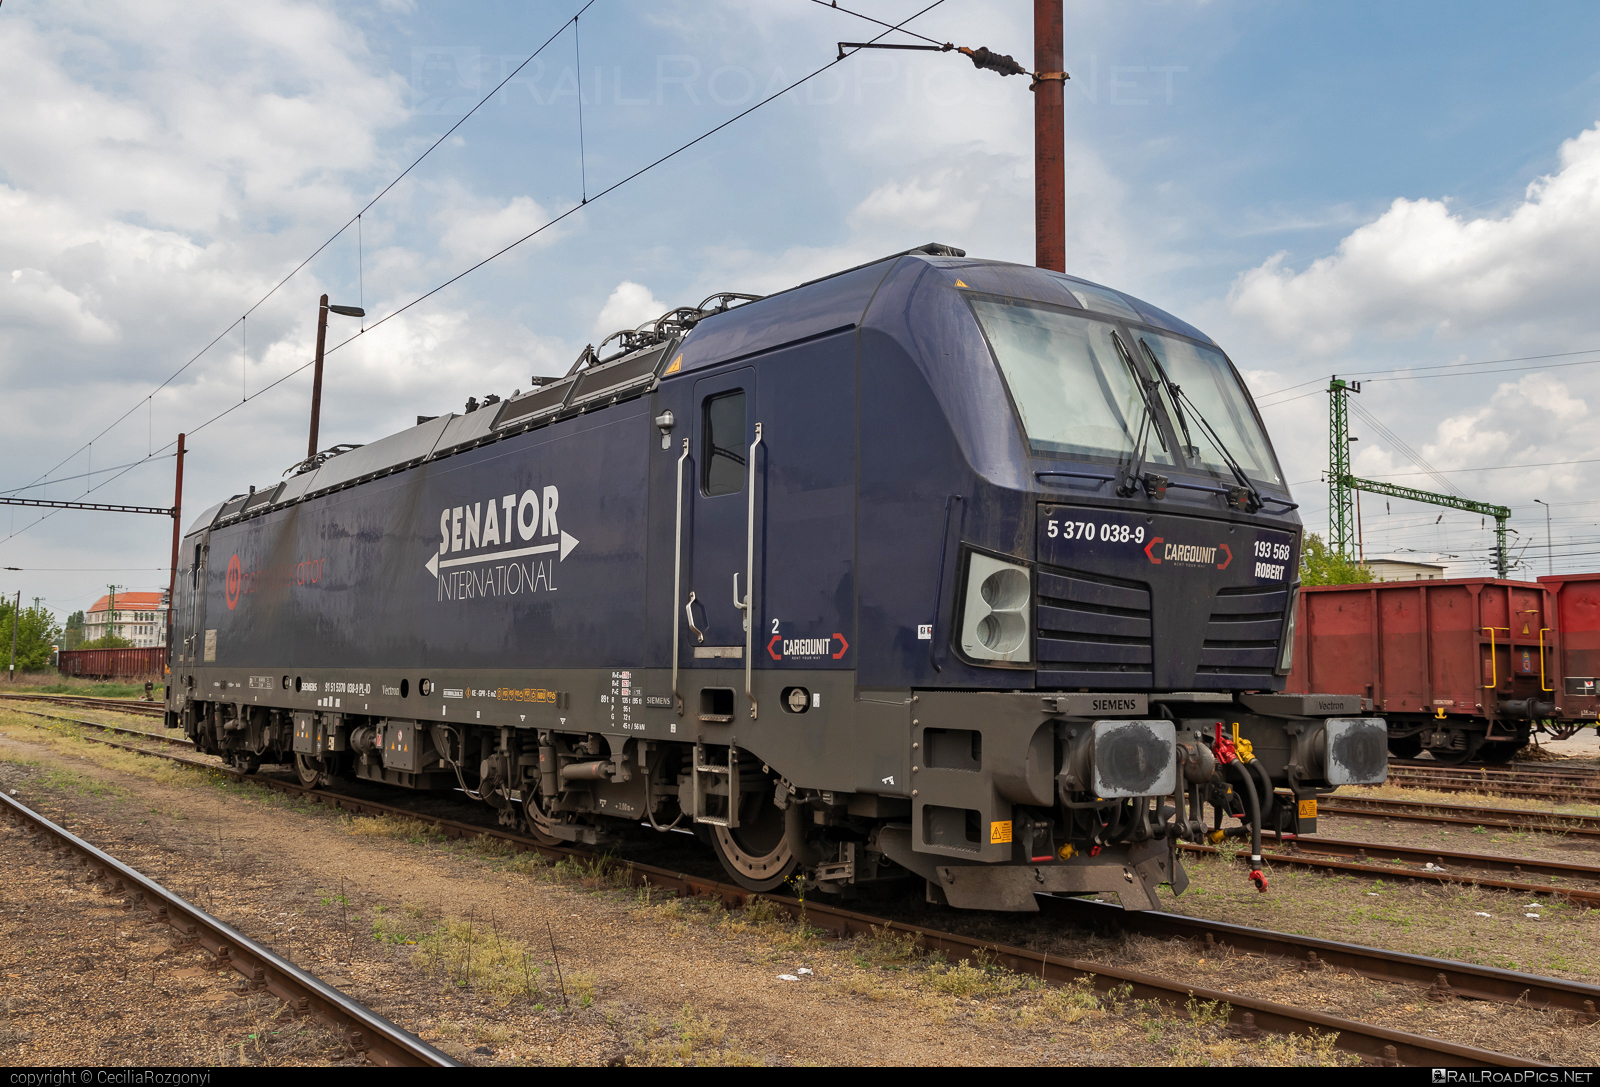 Siemens Vectron MS - 5 370 038-9 operated by LTE Logistik und Transport GmbH #IndustrialDivision #bahnoperator #lte #ltelogistikundtransport #ltelogistikundtransportgmbh #siemens #siemensVectron #siemensVectronMS #vectron #vectronMS